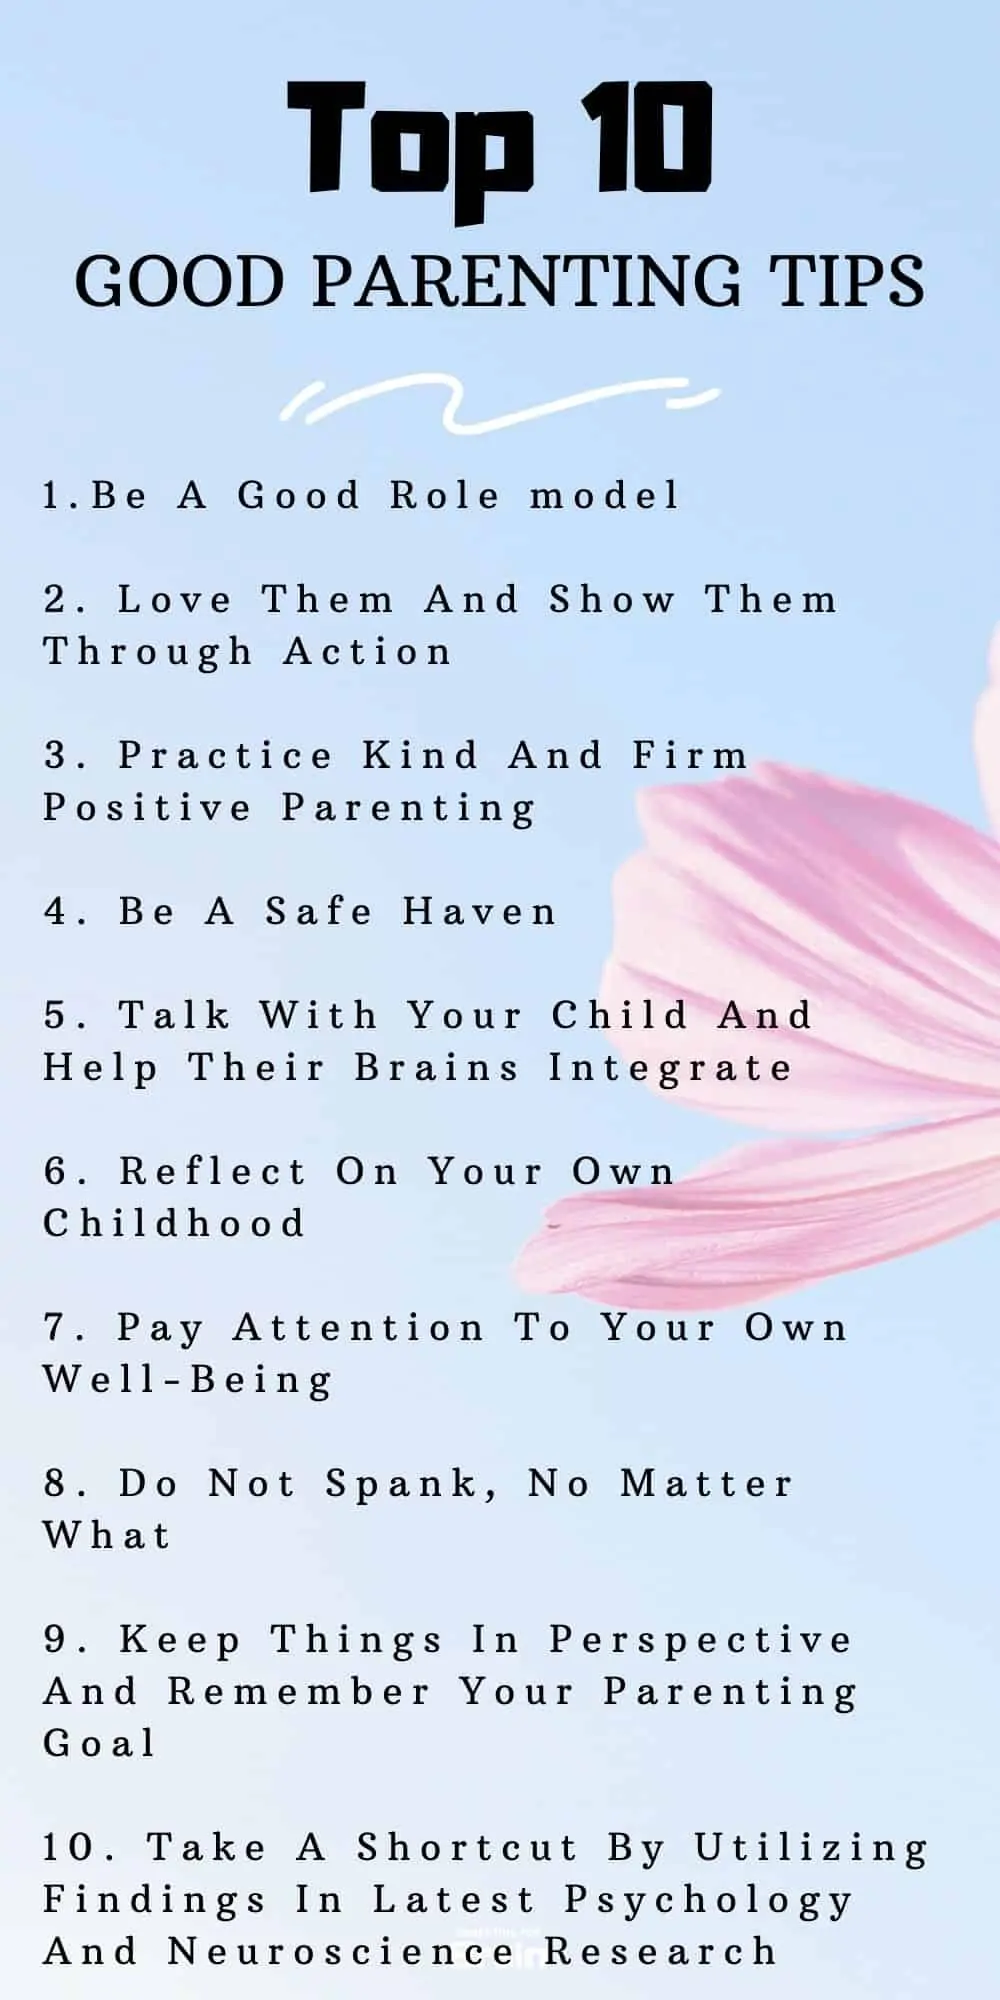 Summary of Top 10 Good Parenting Tips